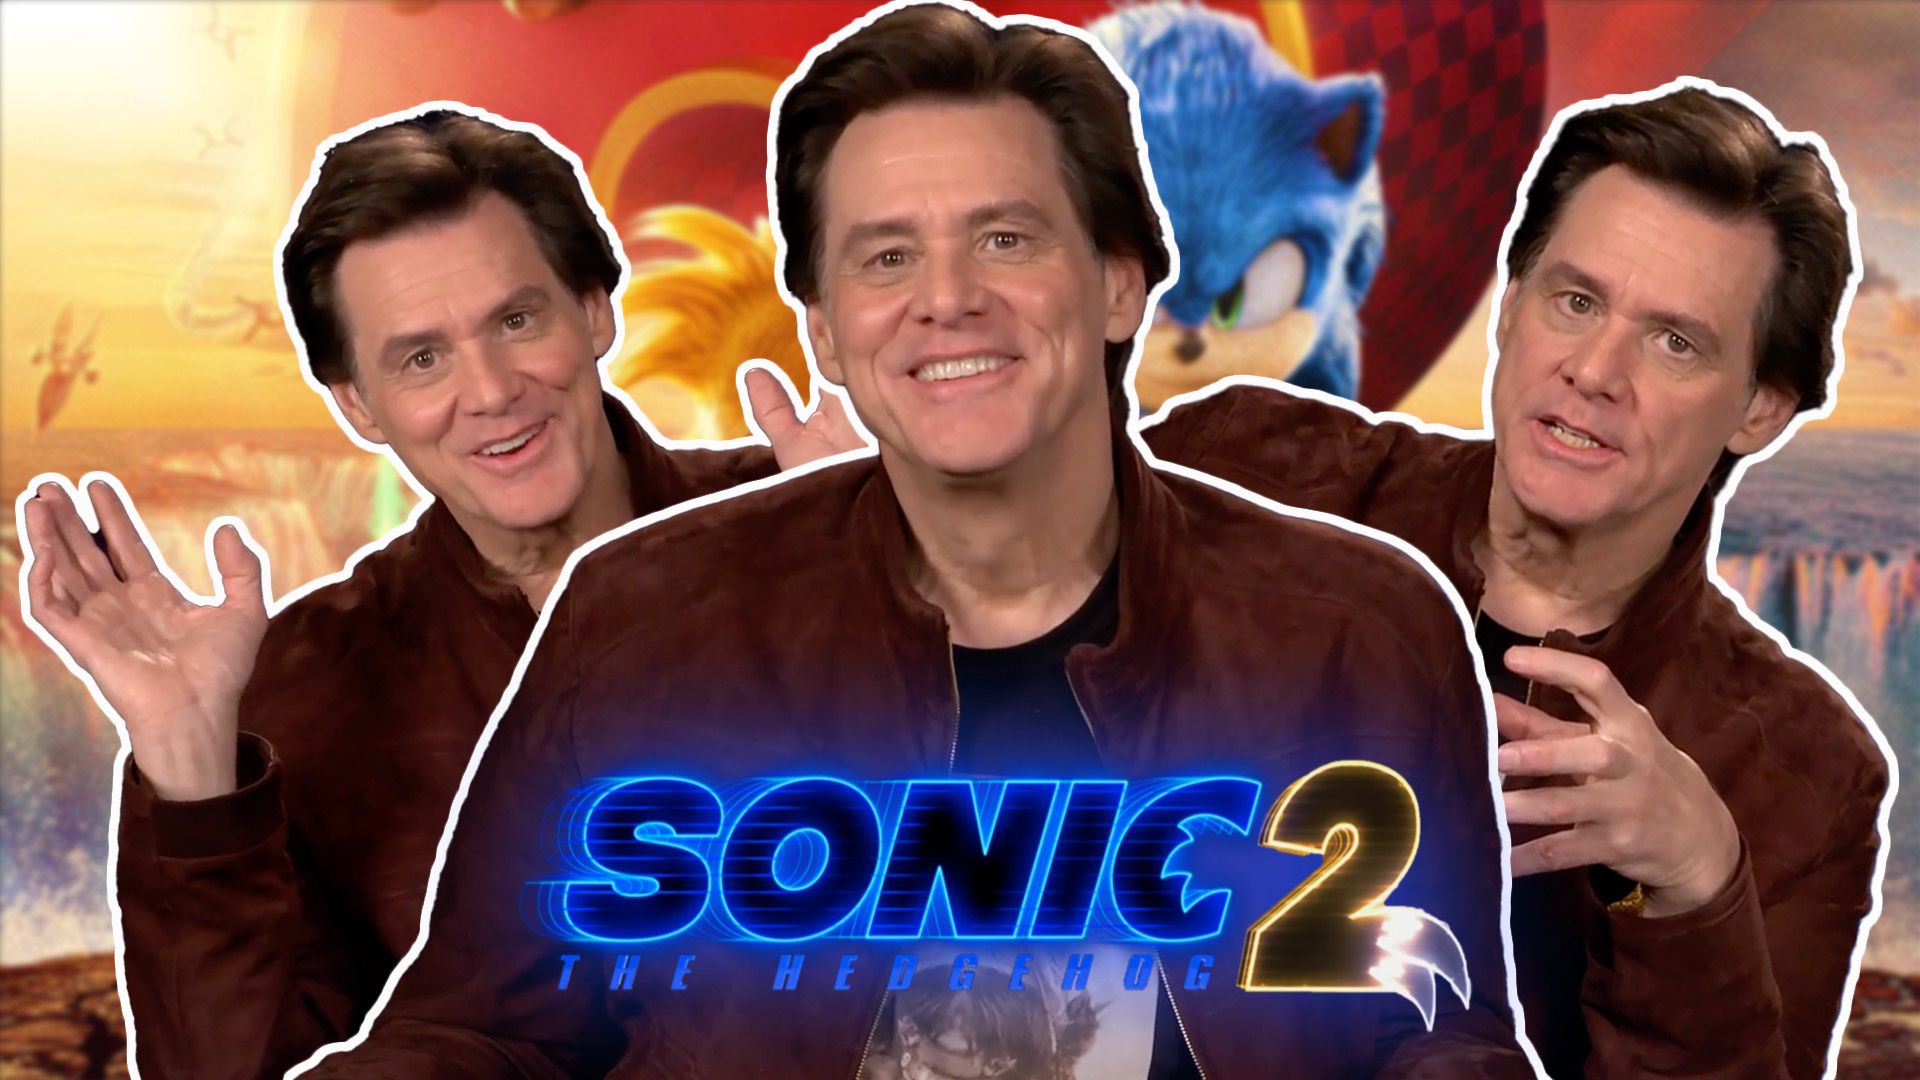 Sonic The Hedgehog 3 to begin filming without actors amidst the